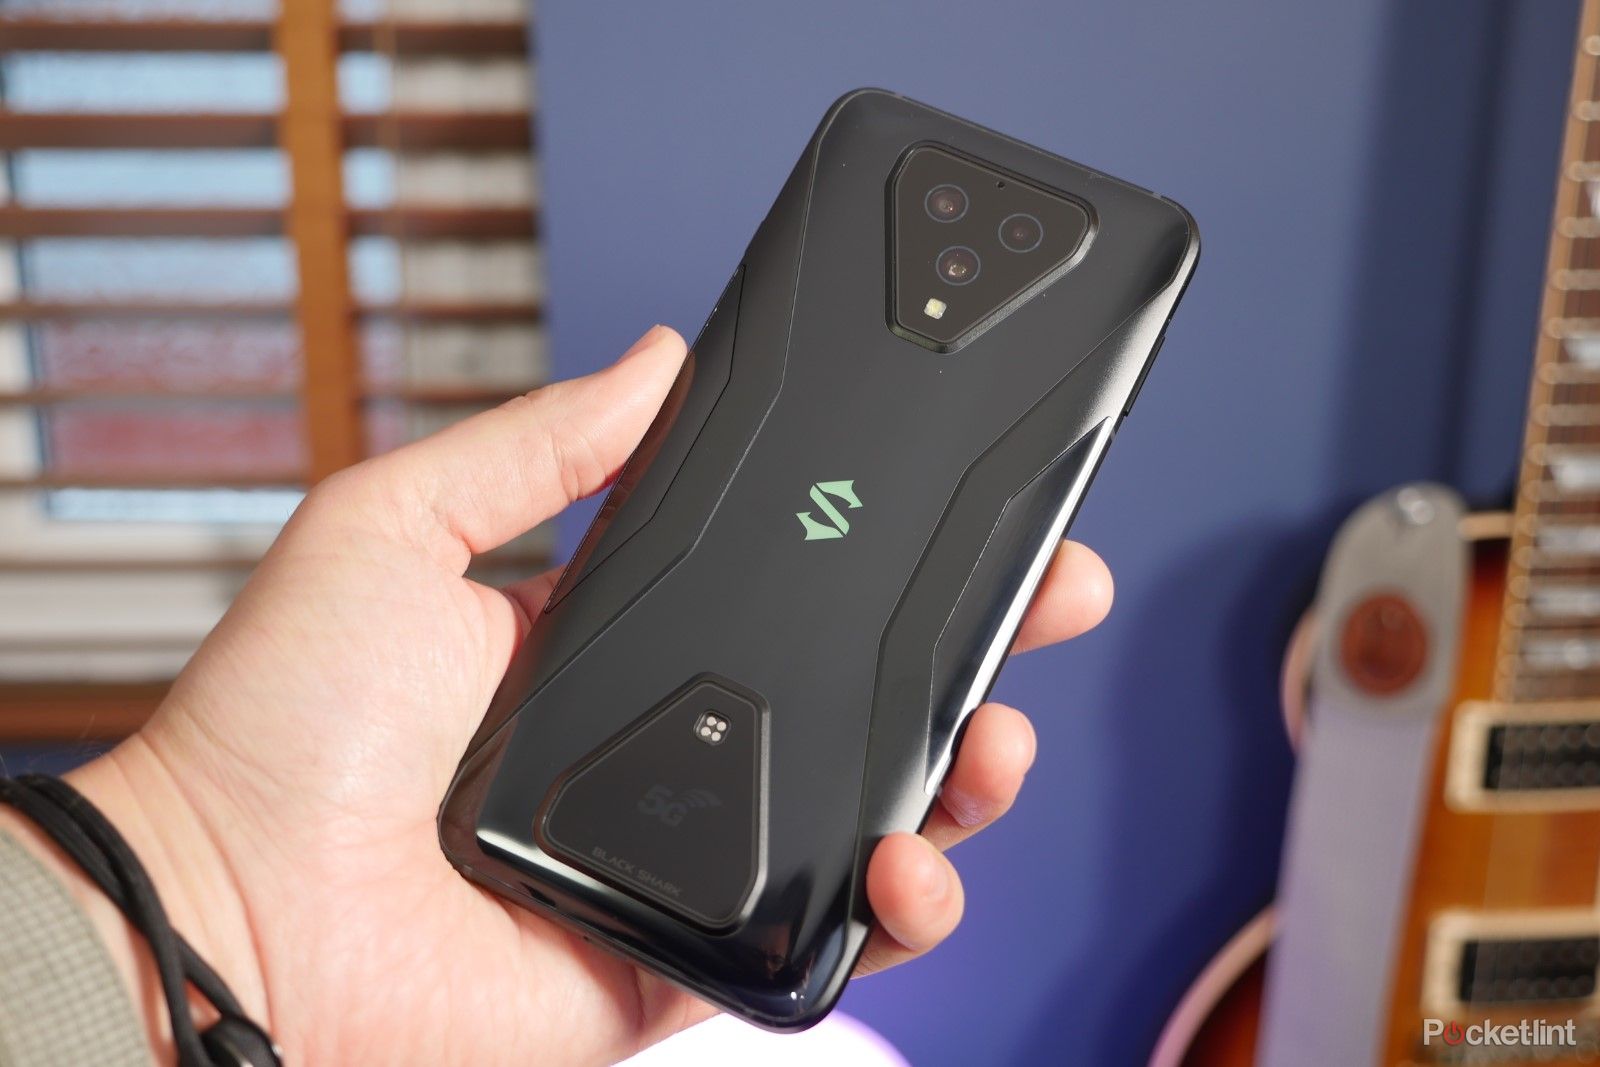 Black Shark 4 will feature insanely fast charging photo 1